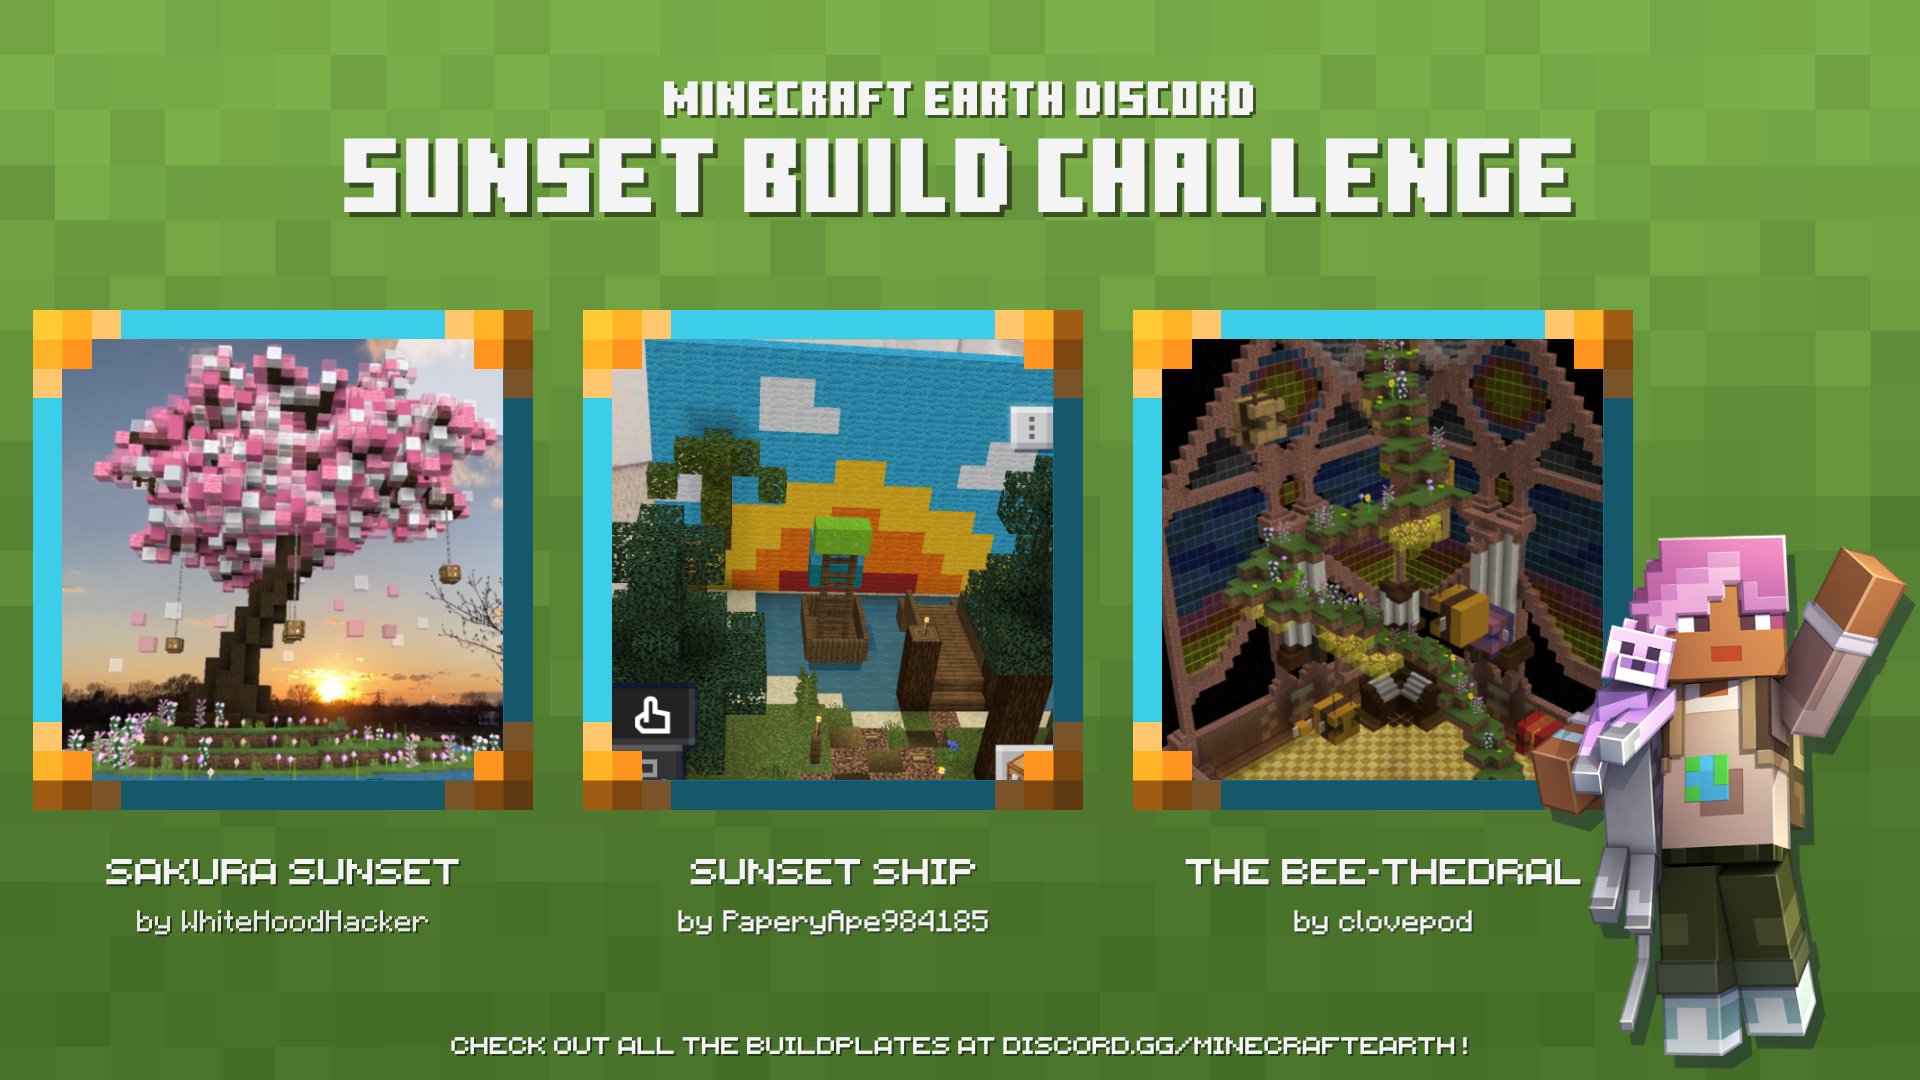 What is Minecraft Earth?